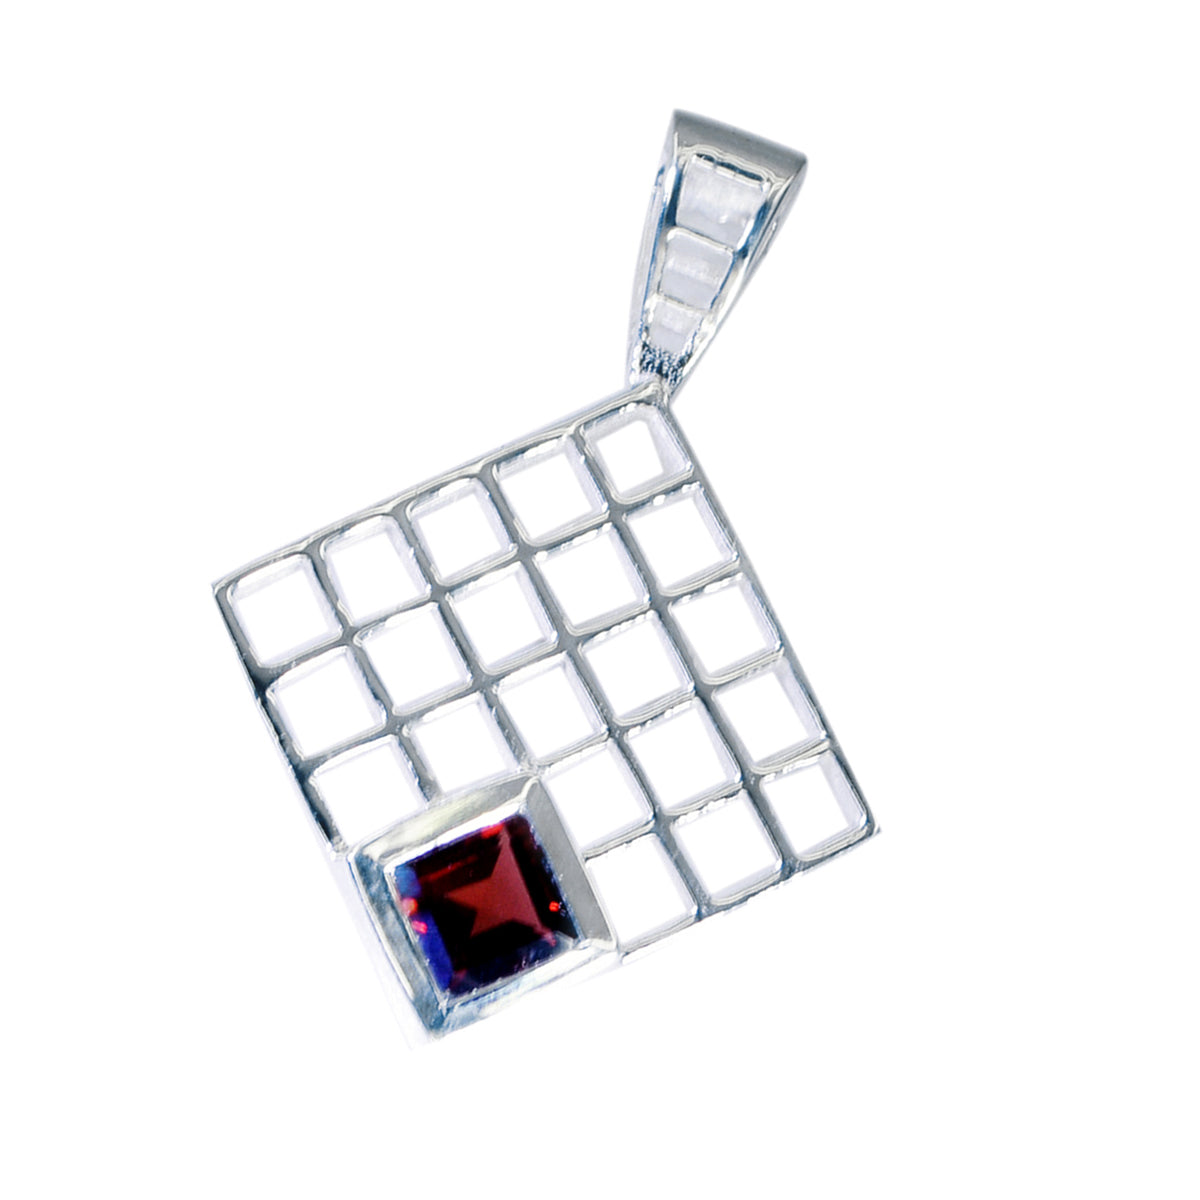 Riyo Beaut Gemstone Square Faceted Red Garnet 994 Sterling Silver Pendant Gift For Good Friday